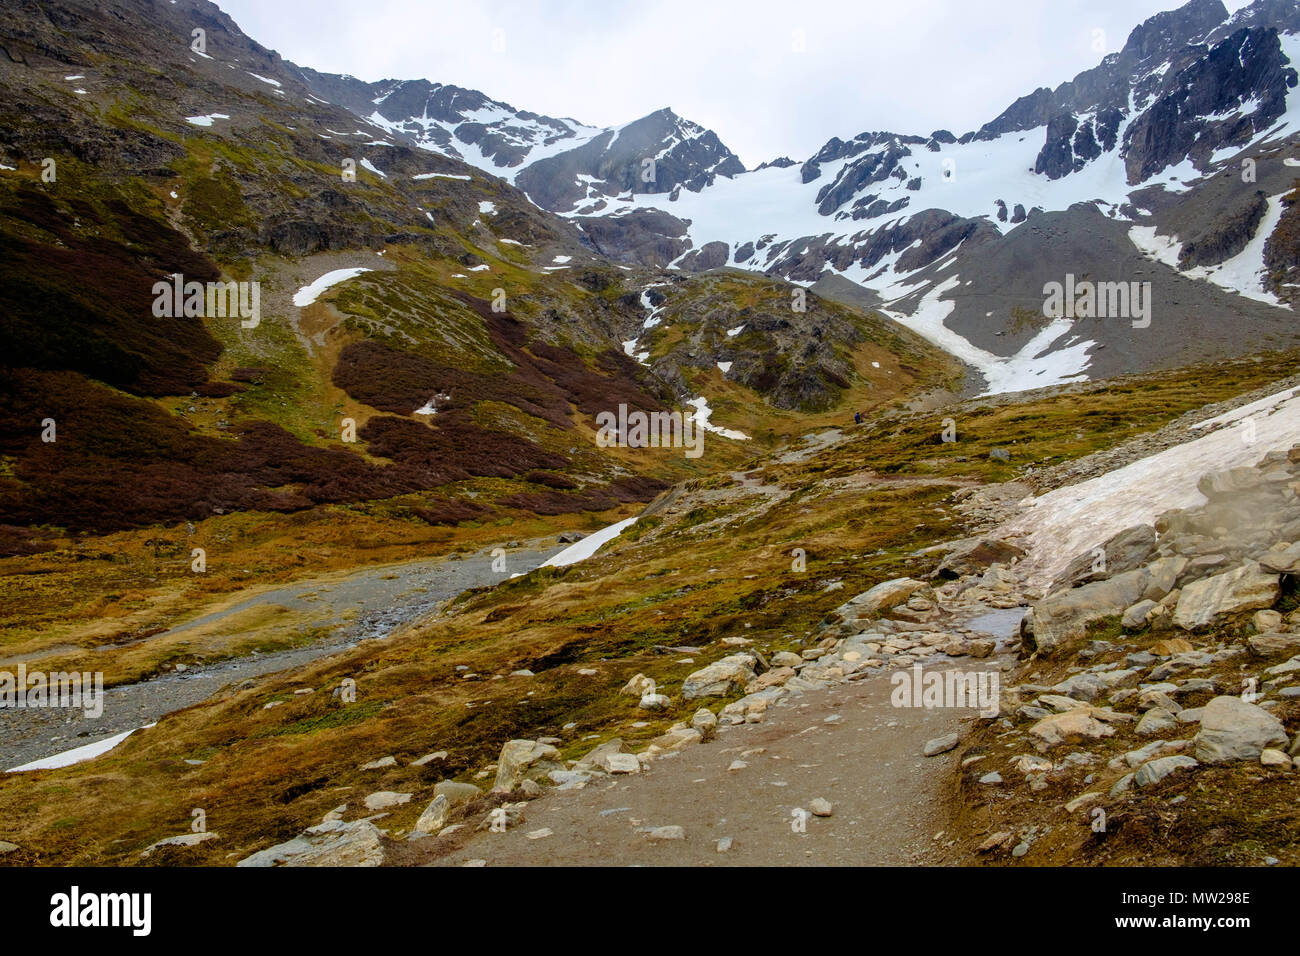 The hiking path towards the Martial Glacier near Ushuaia, Argentina, leads through patches of snow and next to a small stream towards a snowy glacier. Stock Photo